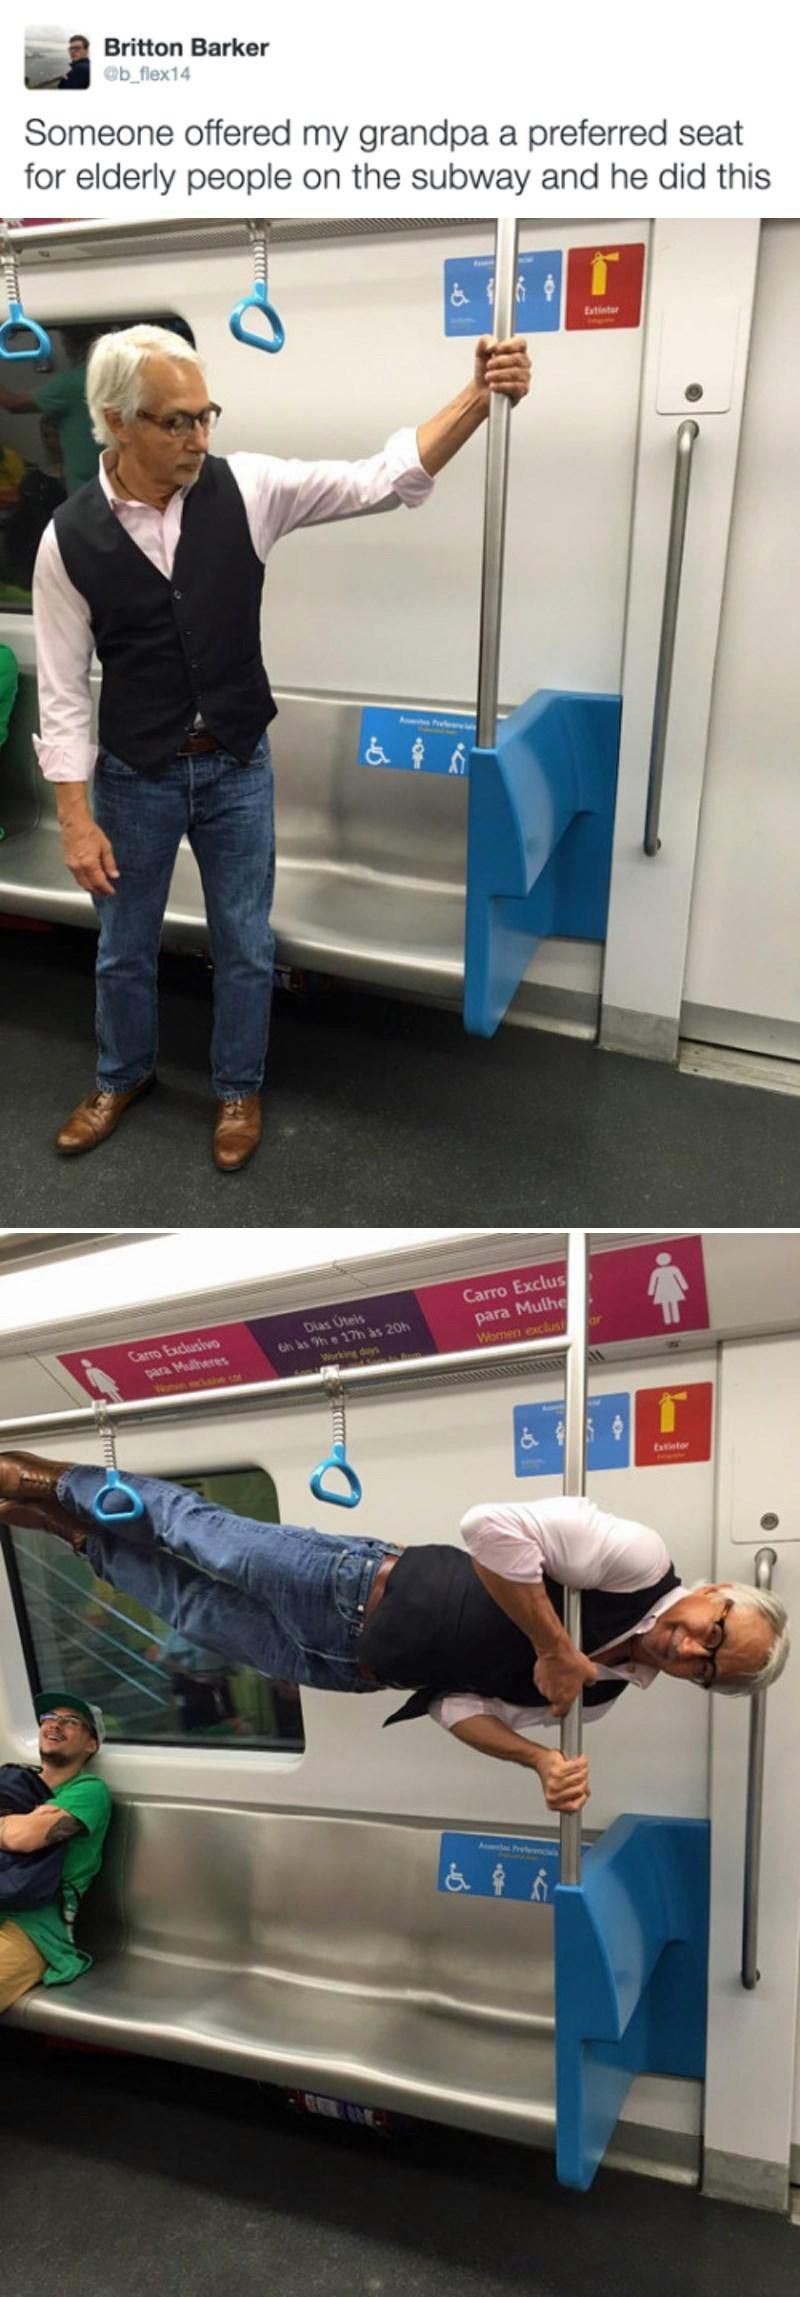 Strong grandpa doing a stunt on the subway